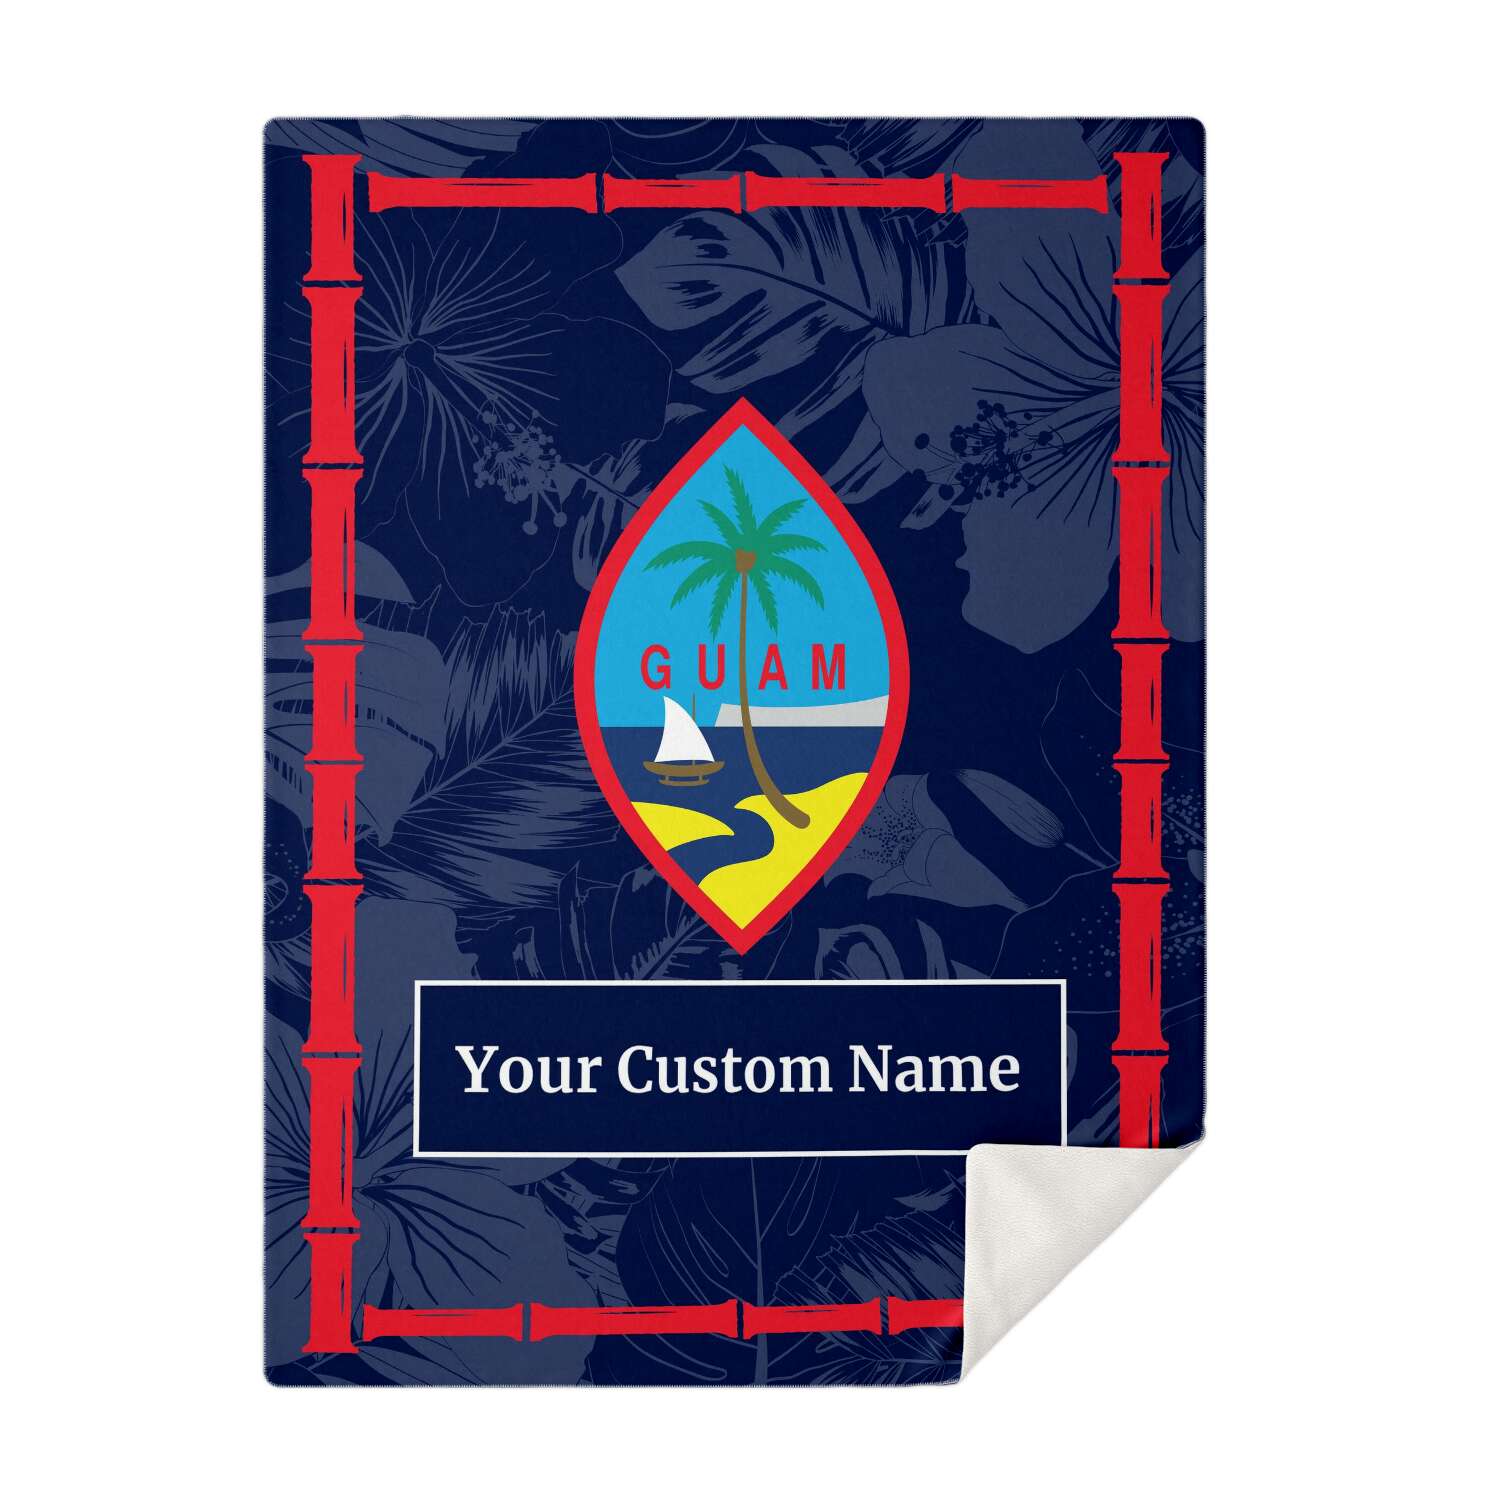 Guam Flag Bamboo Microfleece Blanket with Personalization